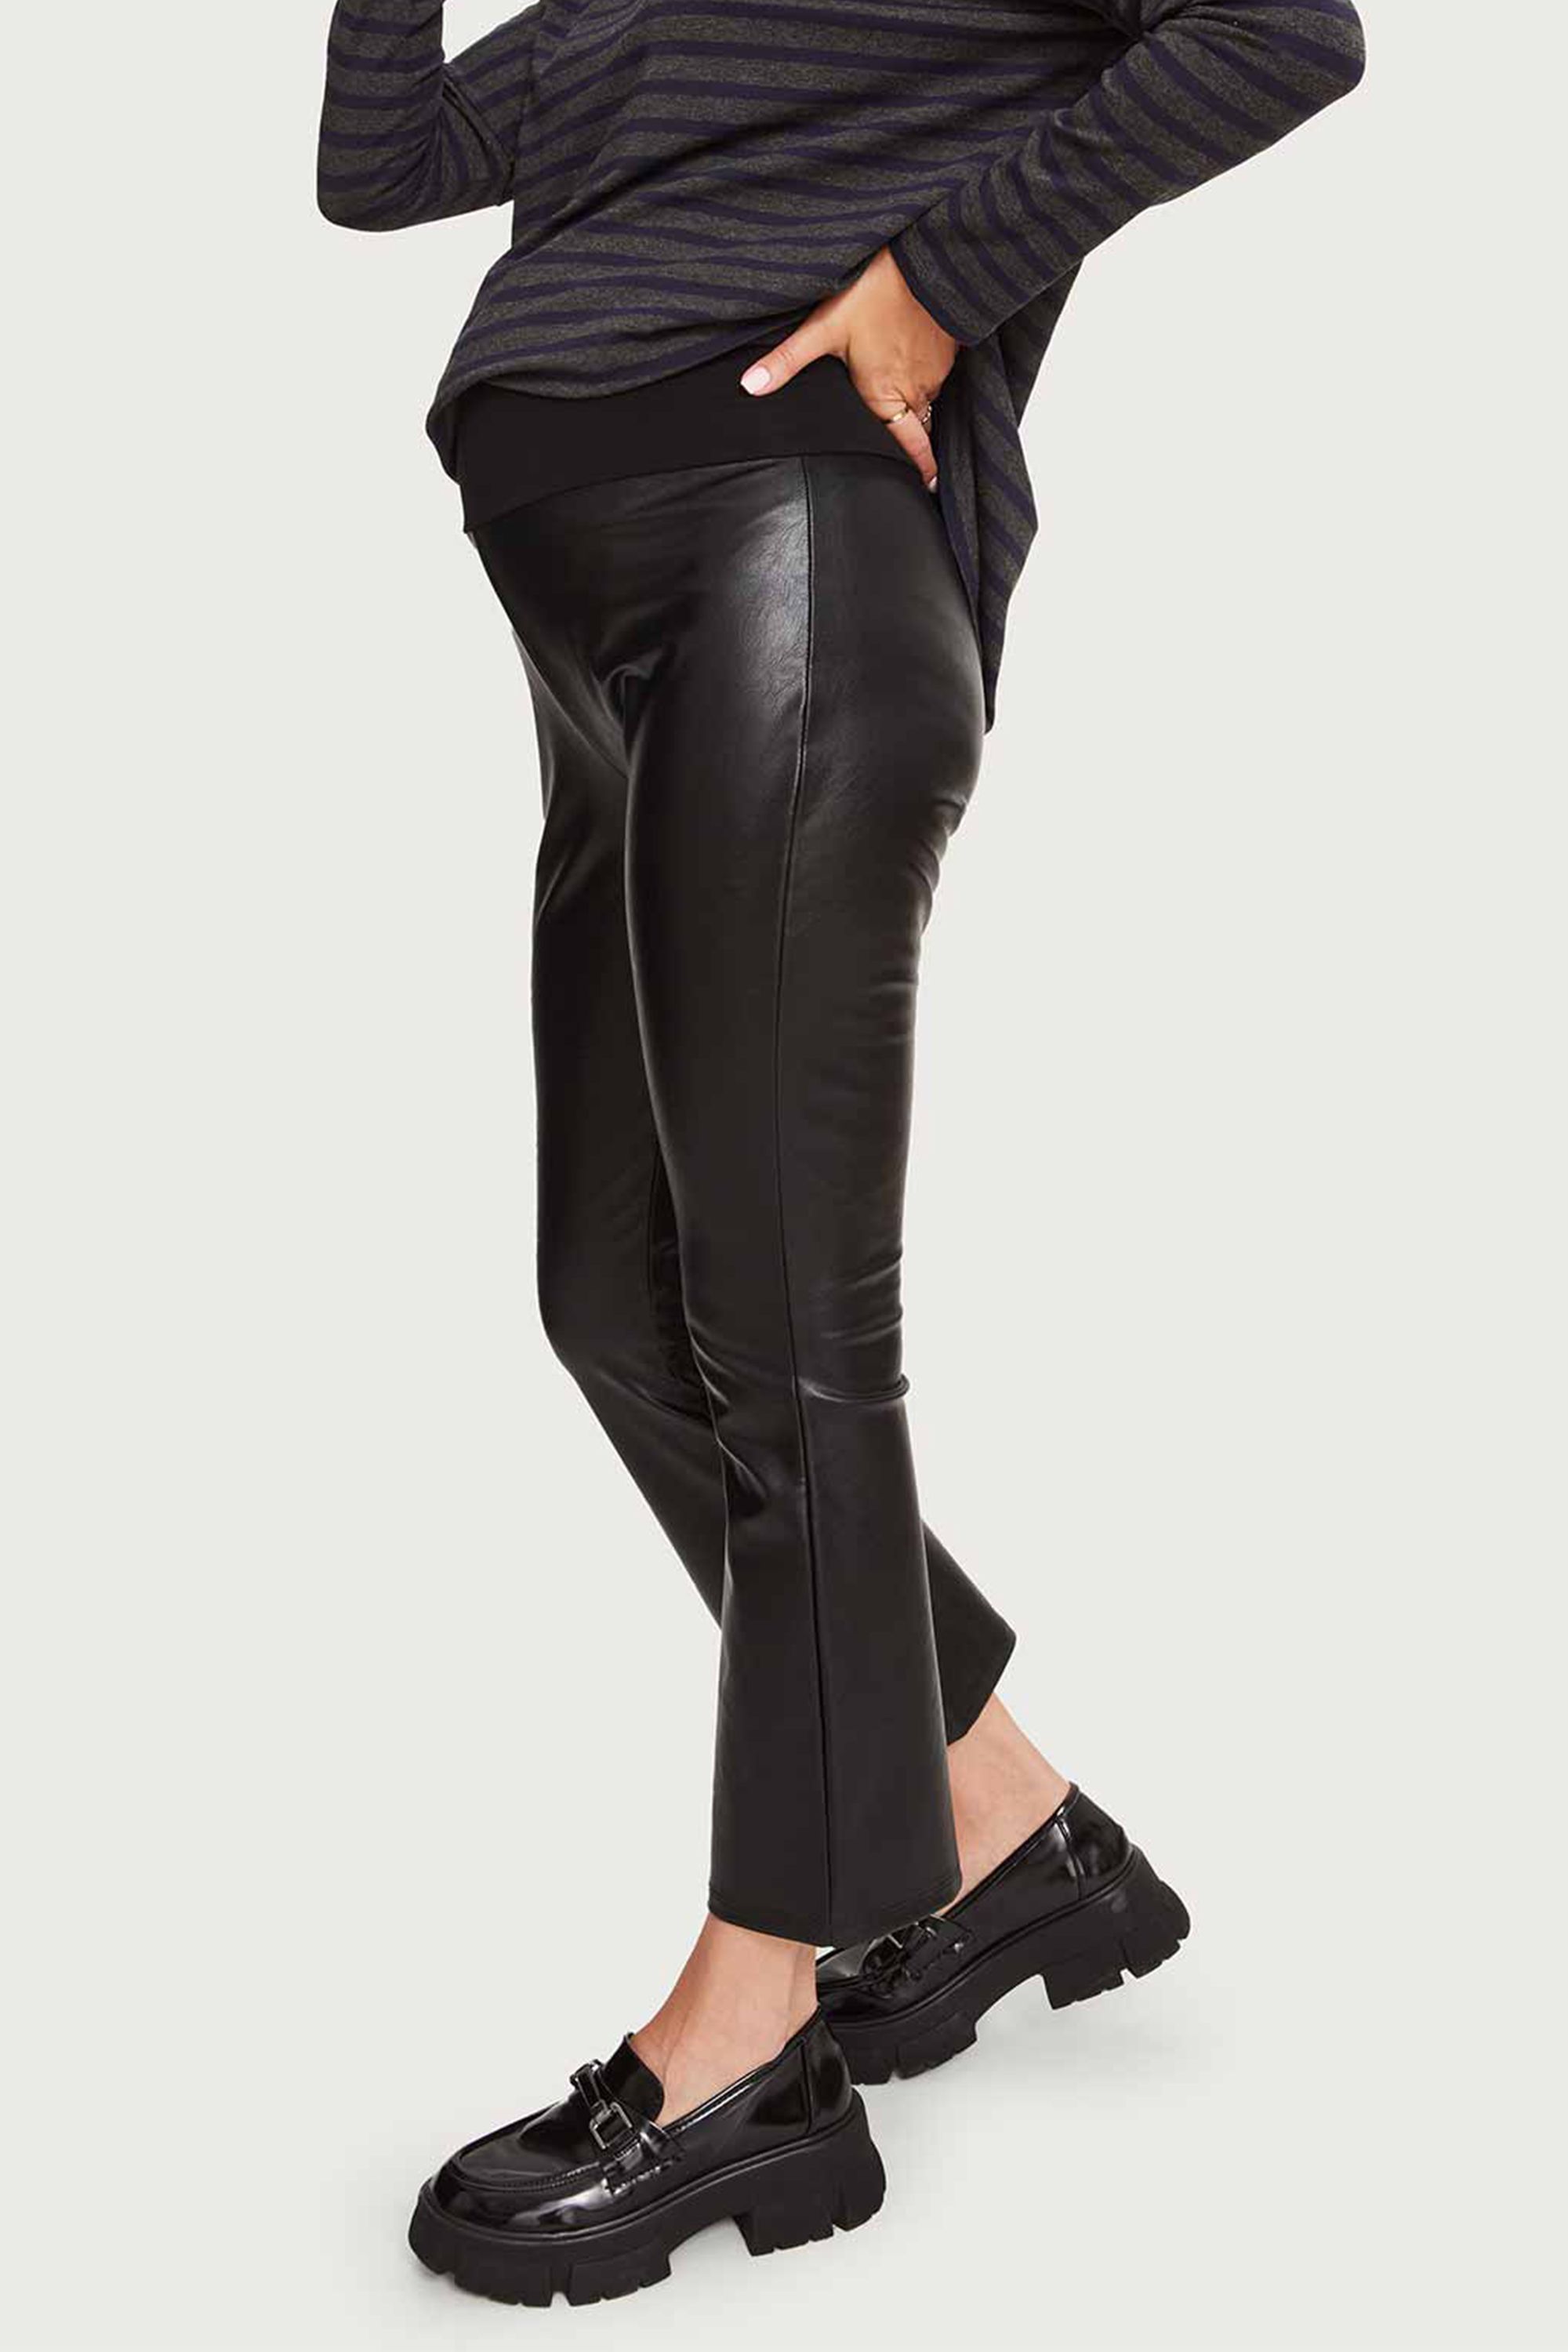 How to Stretch Your Leather Pants In a Few Simple Steps – Leather Skill